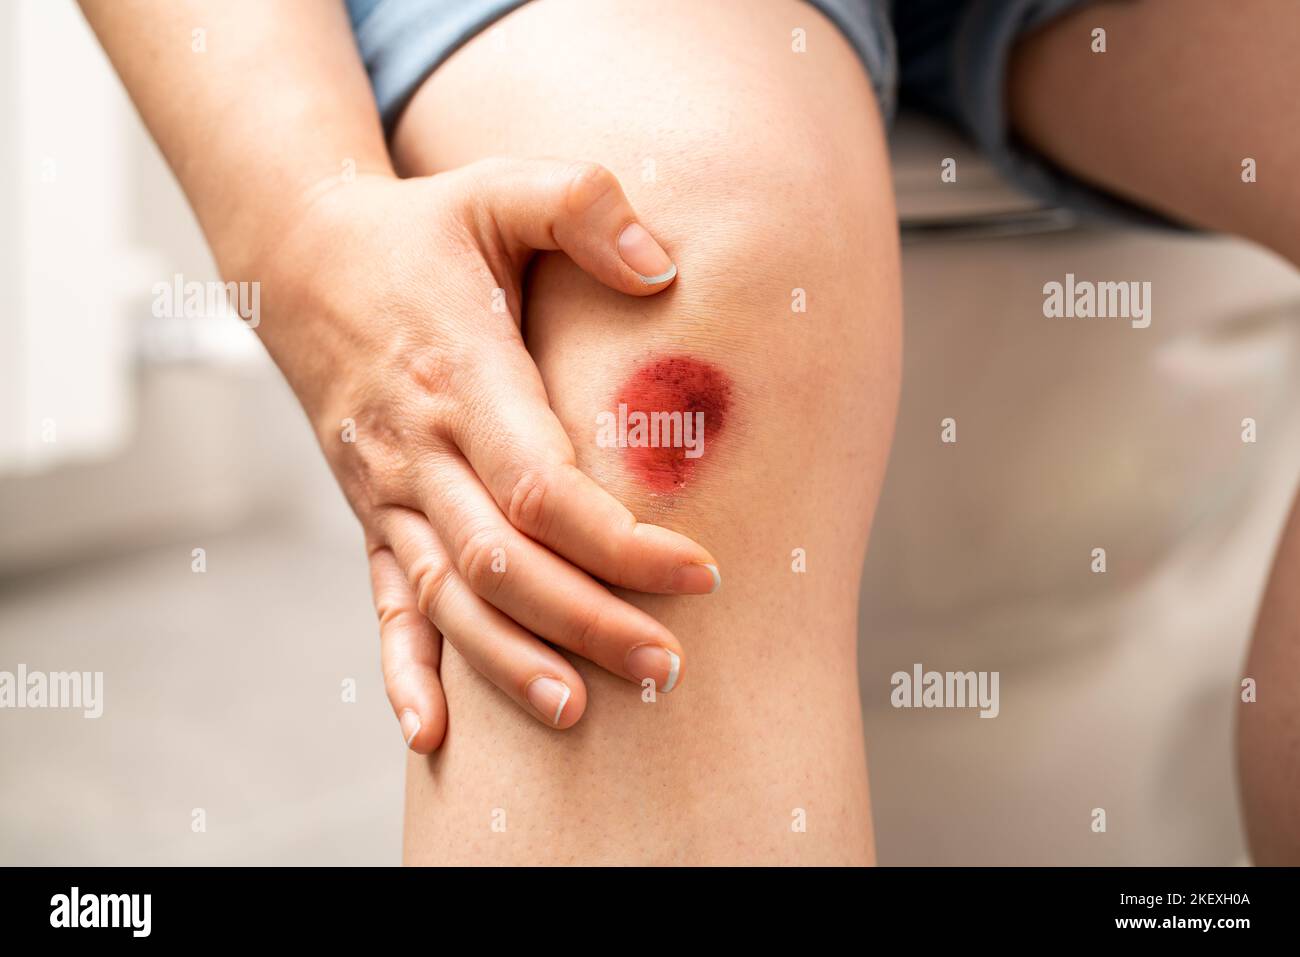 Close up of a woman's legs sitting on the toilet with a bloody wound Stock Photo